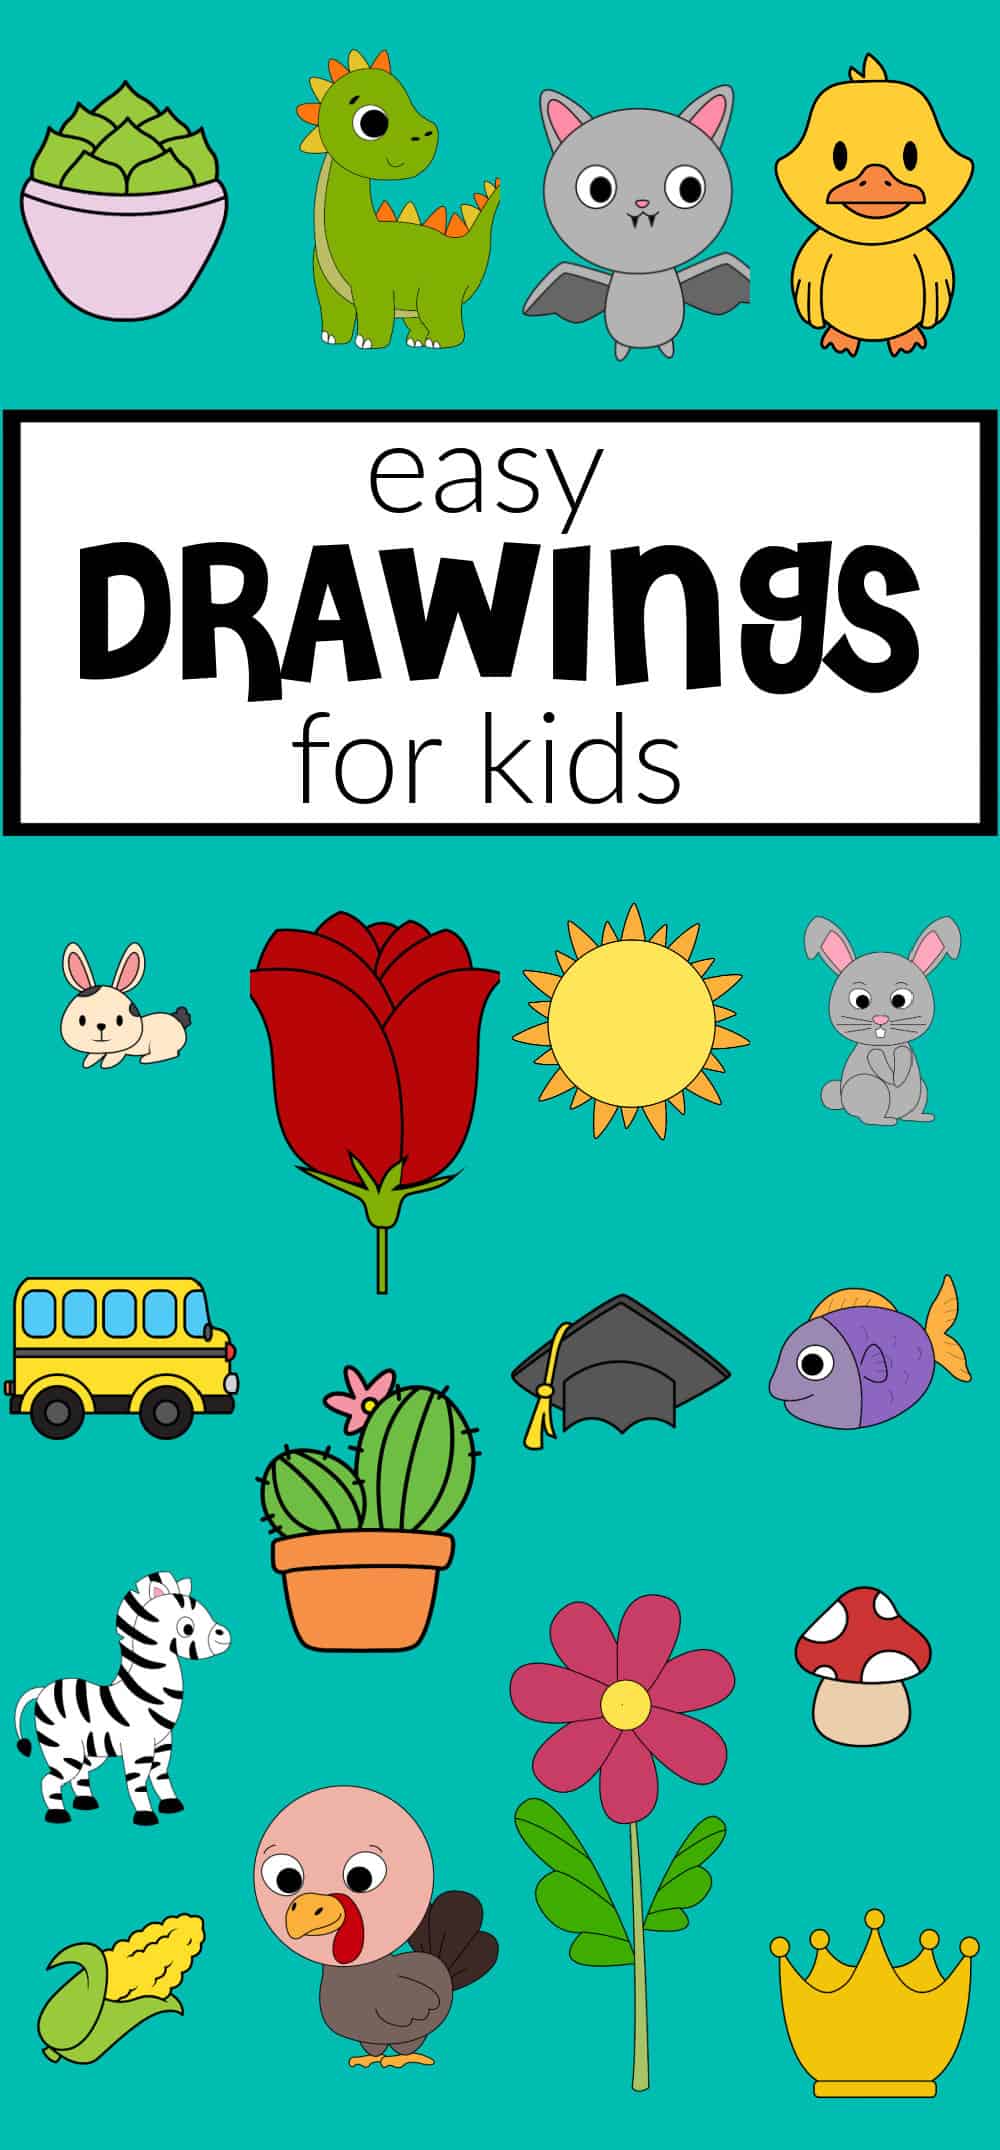 How to draw a bird : Step by step bird drawing tutorial for small kids-anthinhphatland.vn